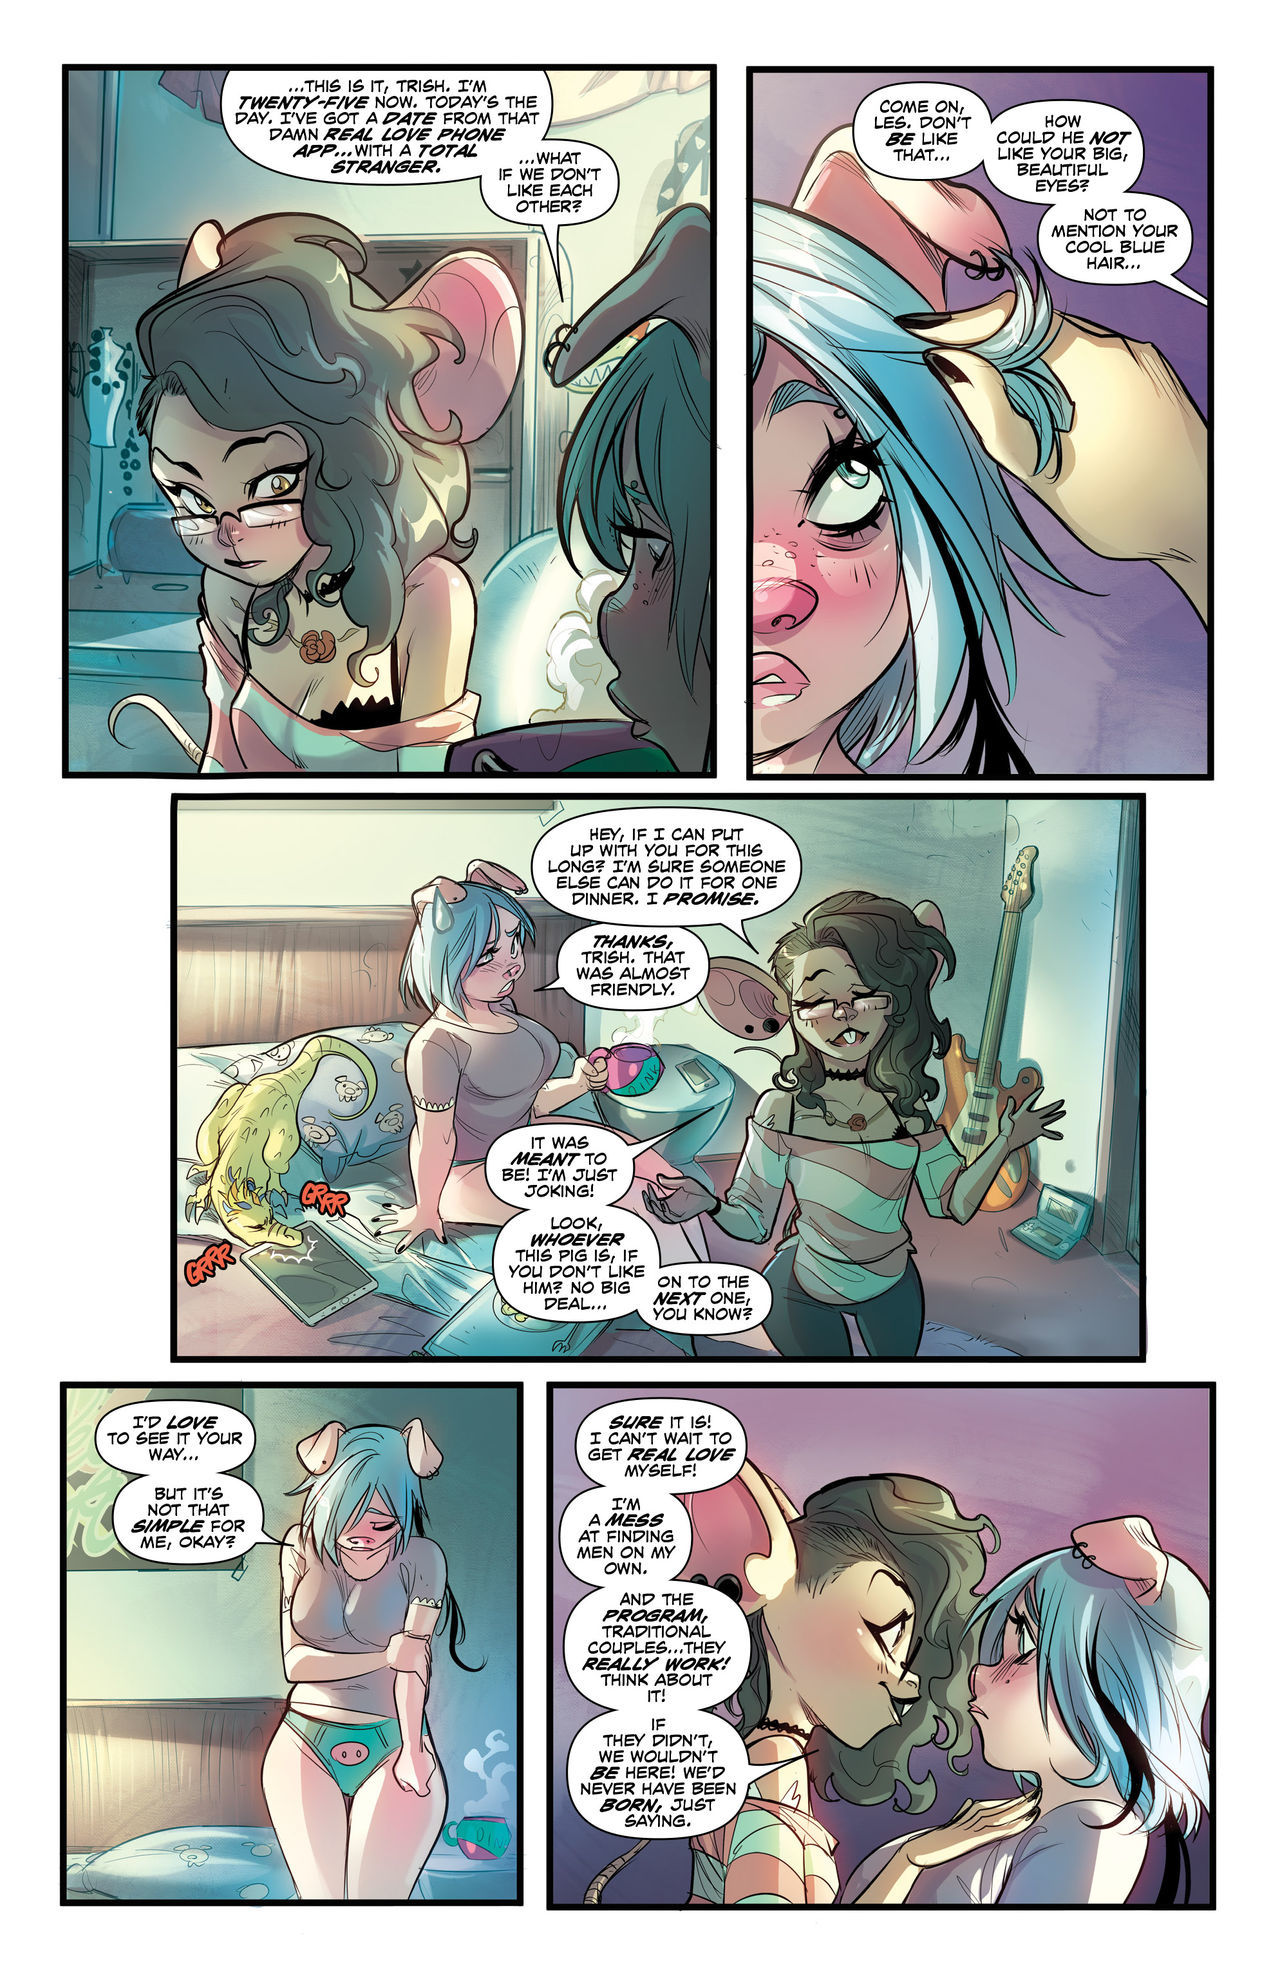 Unnatural Issue 2 by Mirka Andolfo page 6